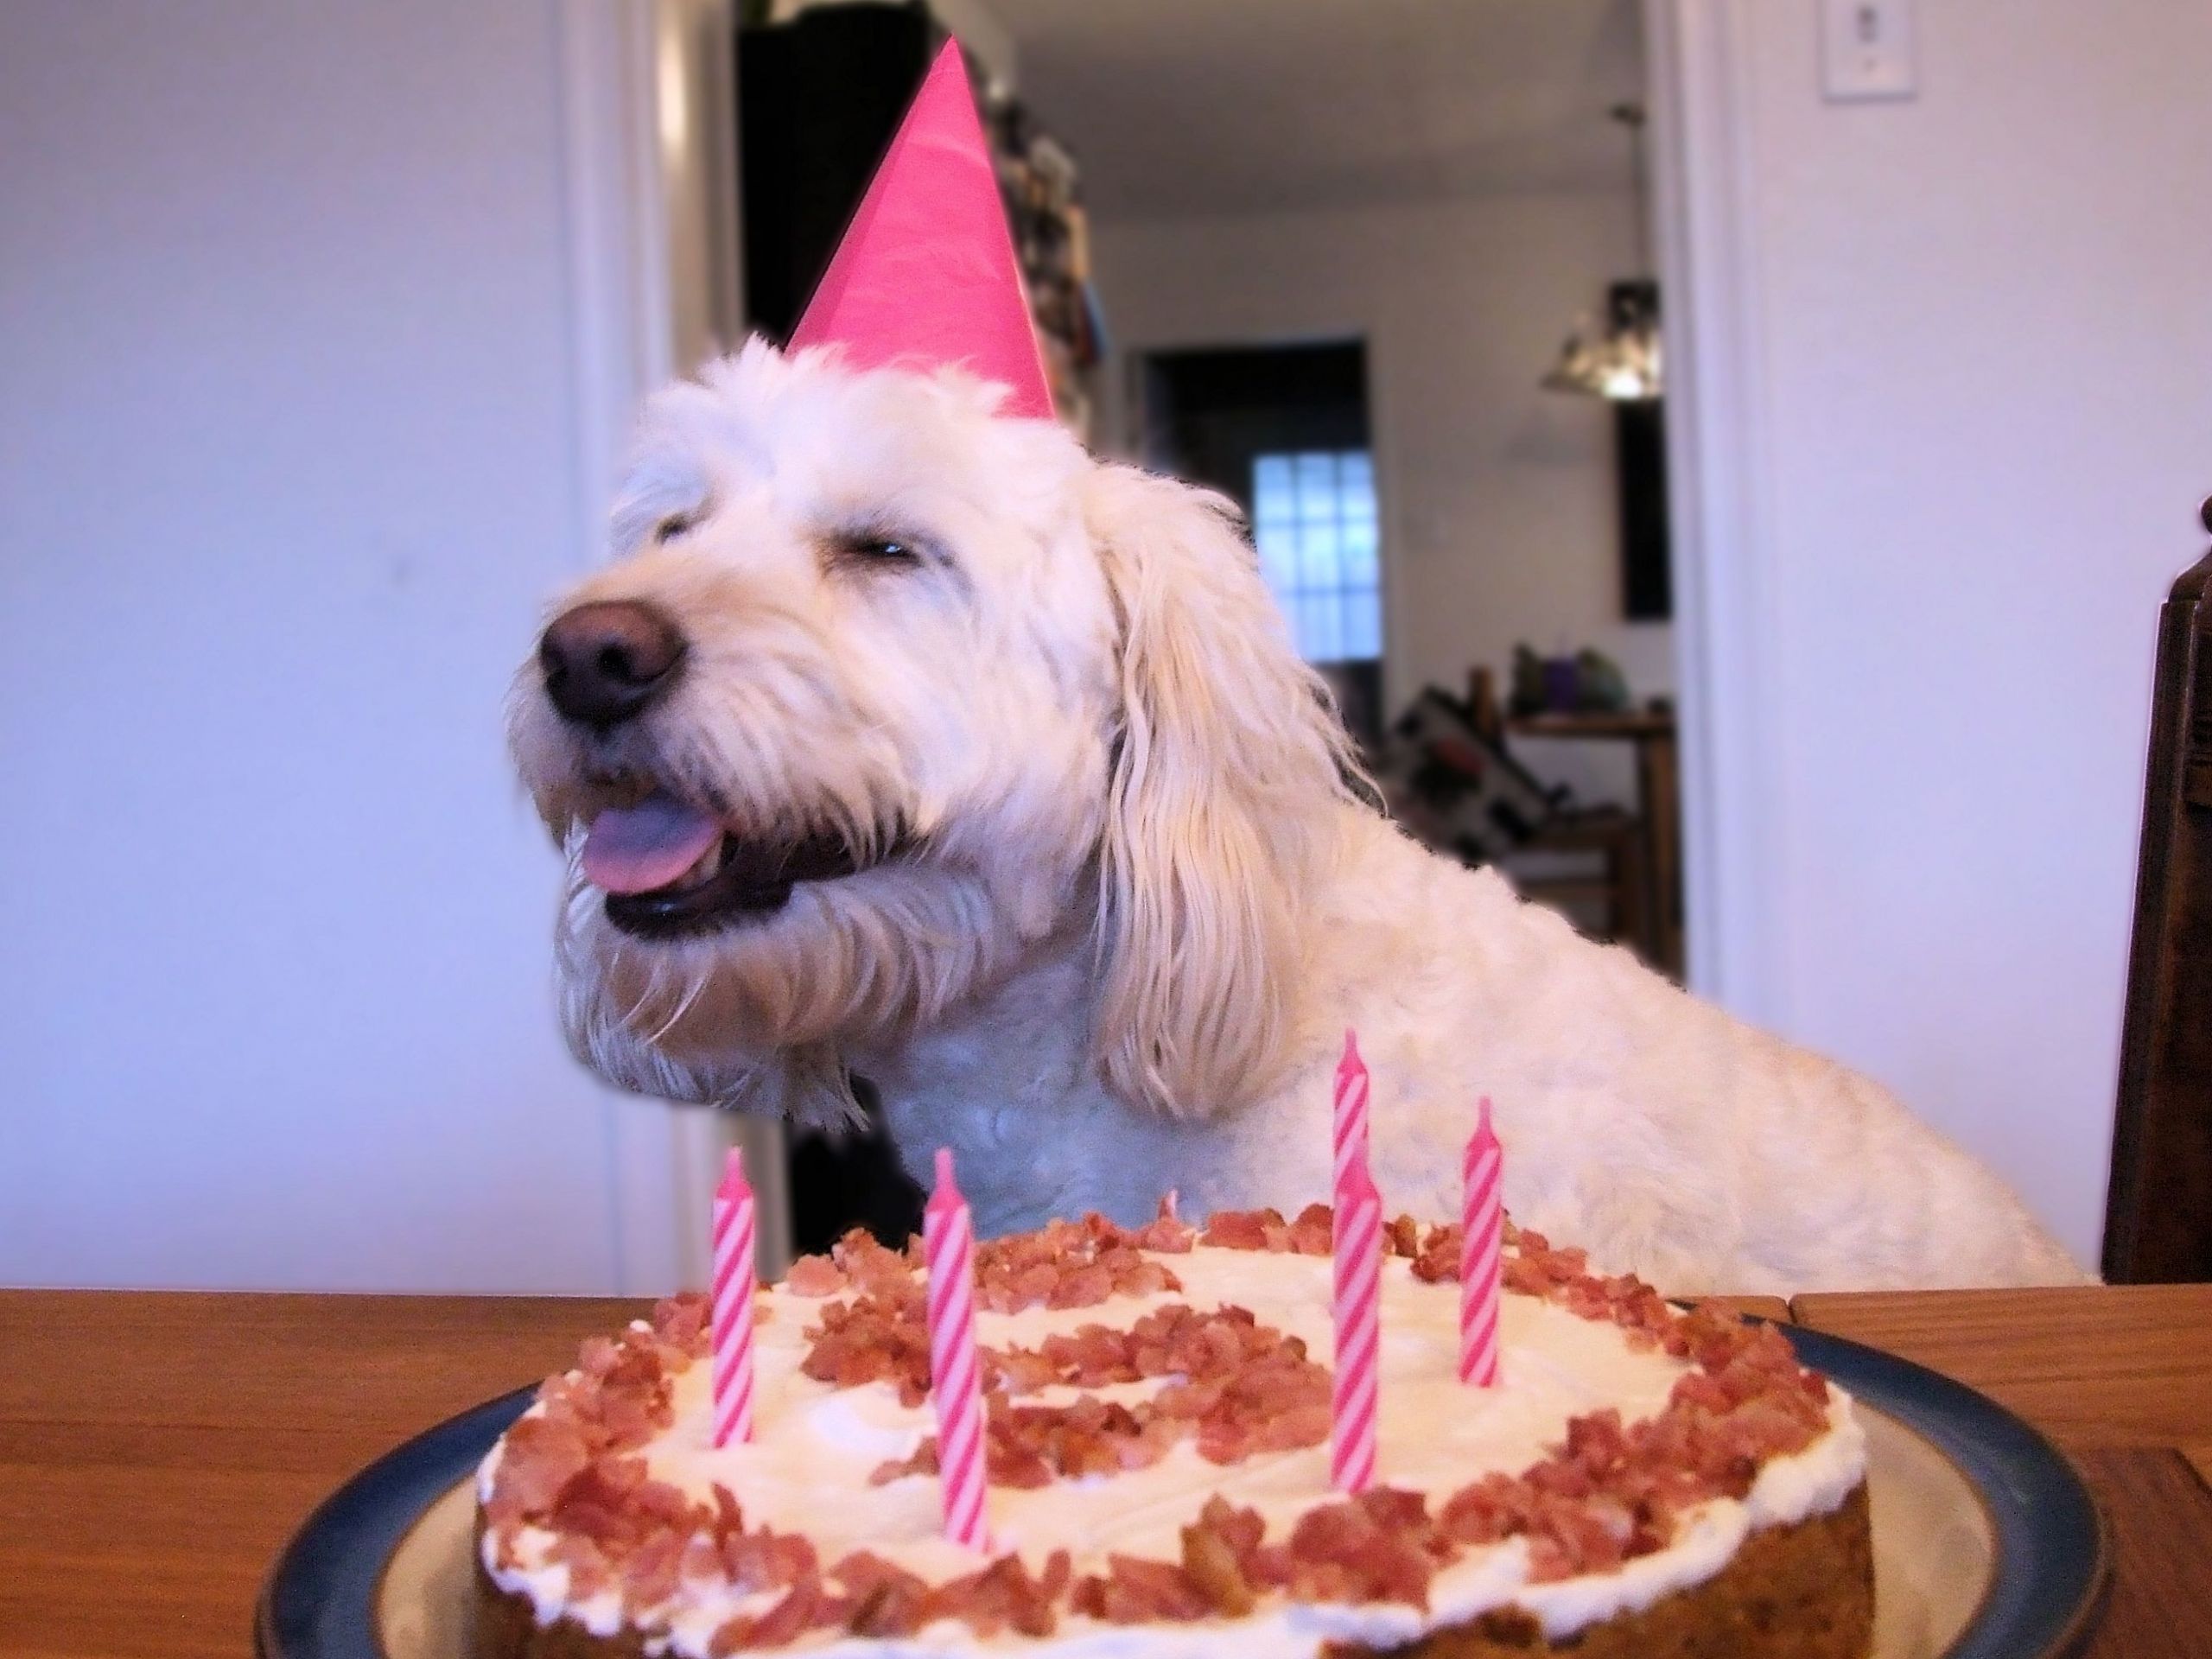 The Best Ideas for Birthday Cake for Dogs